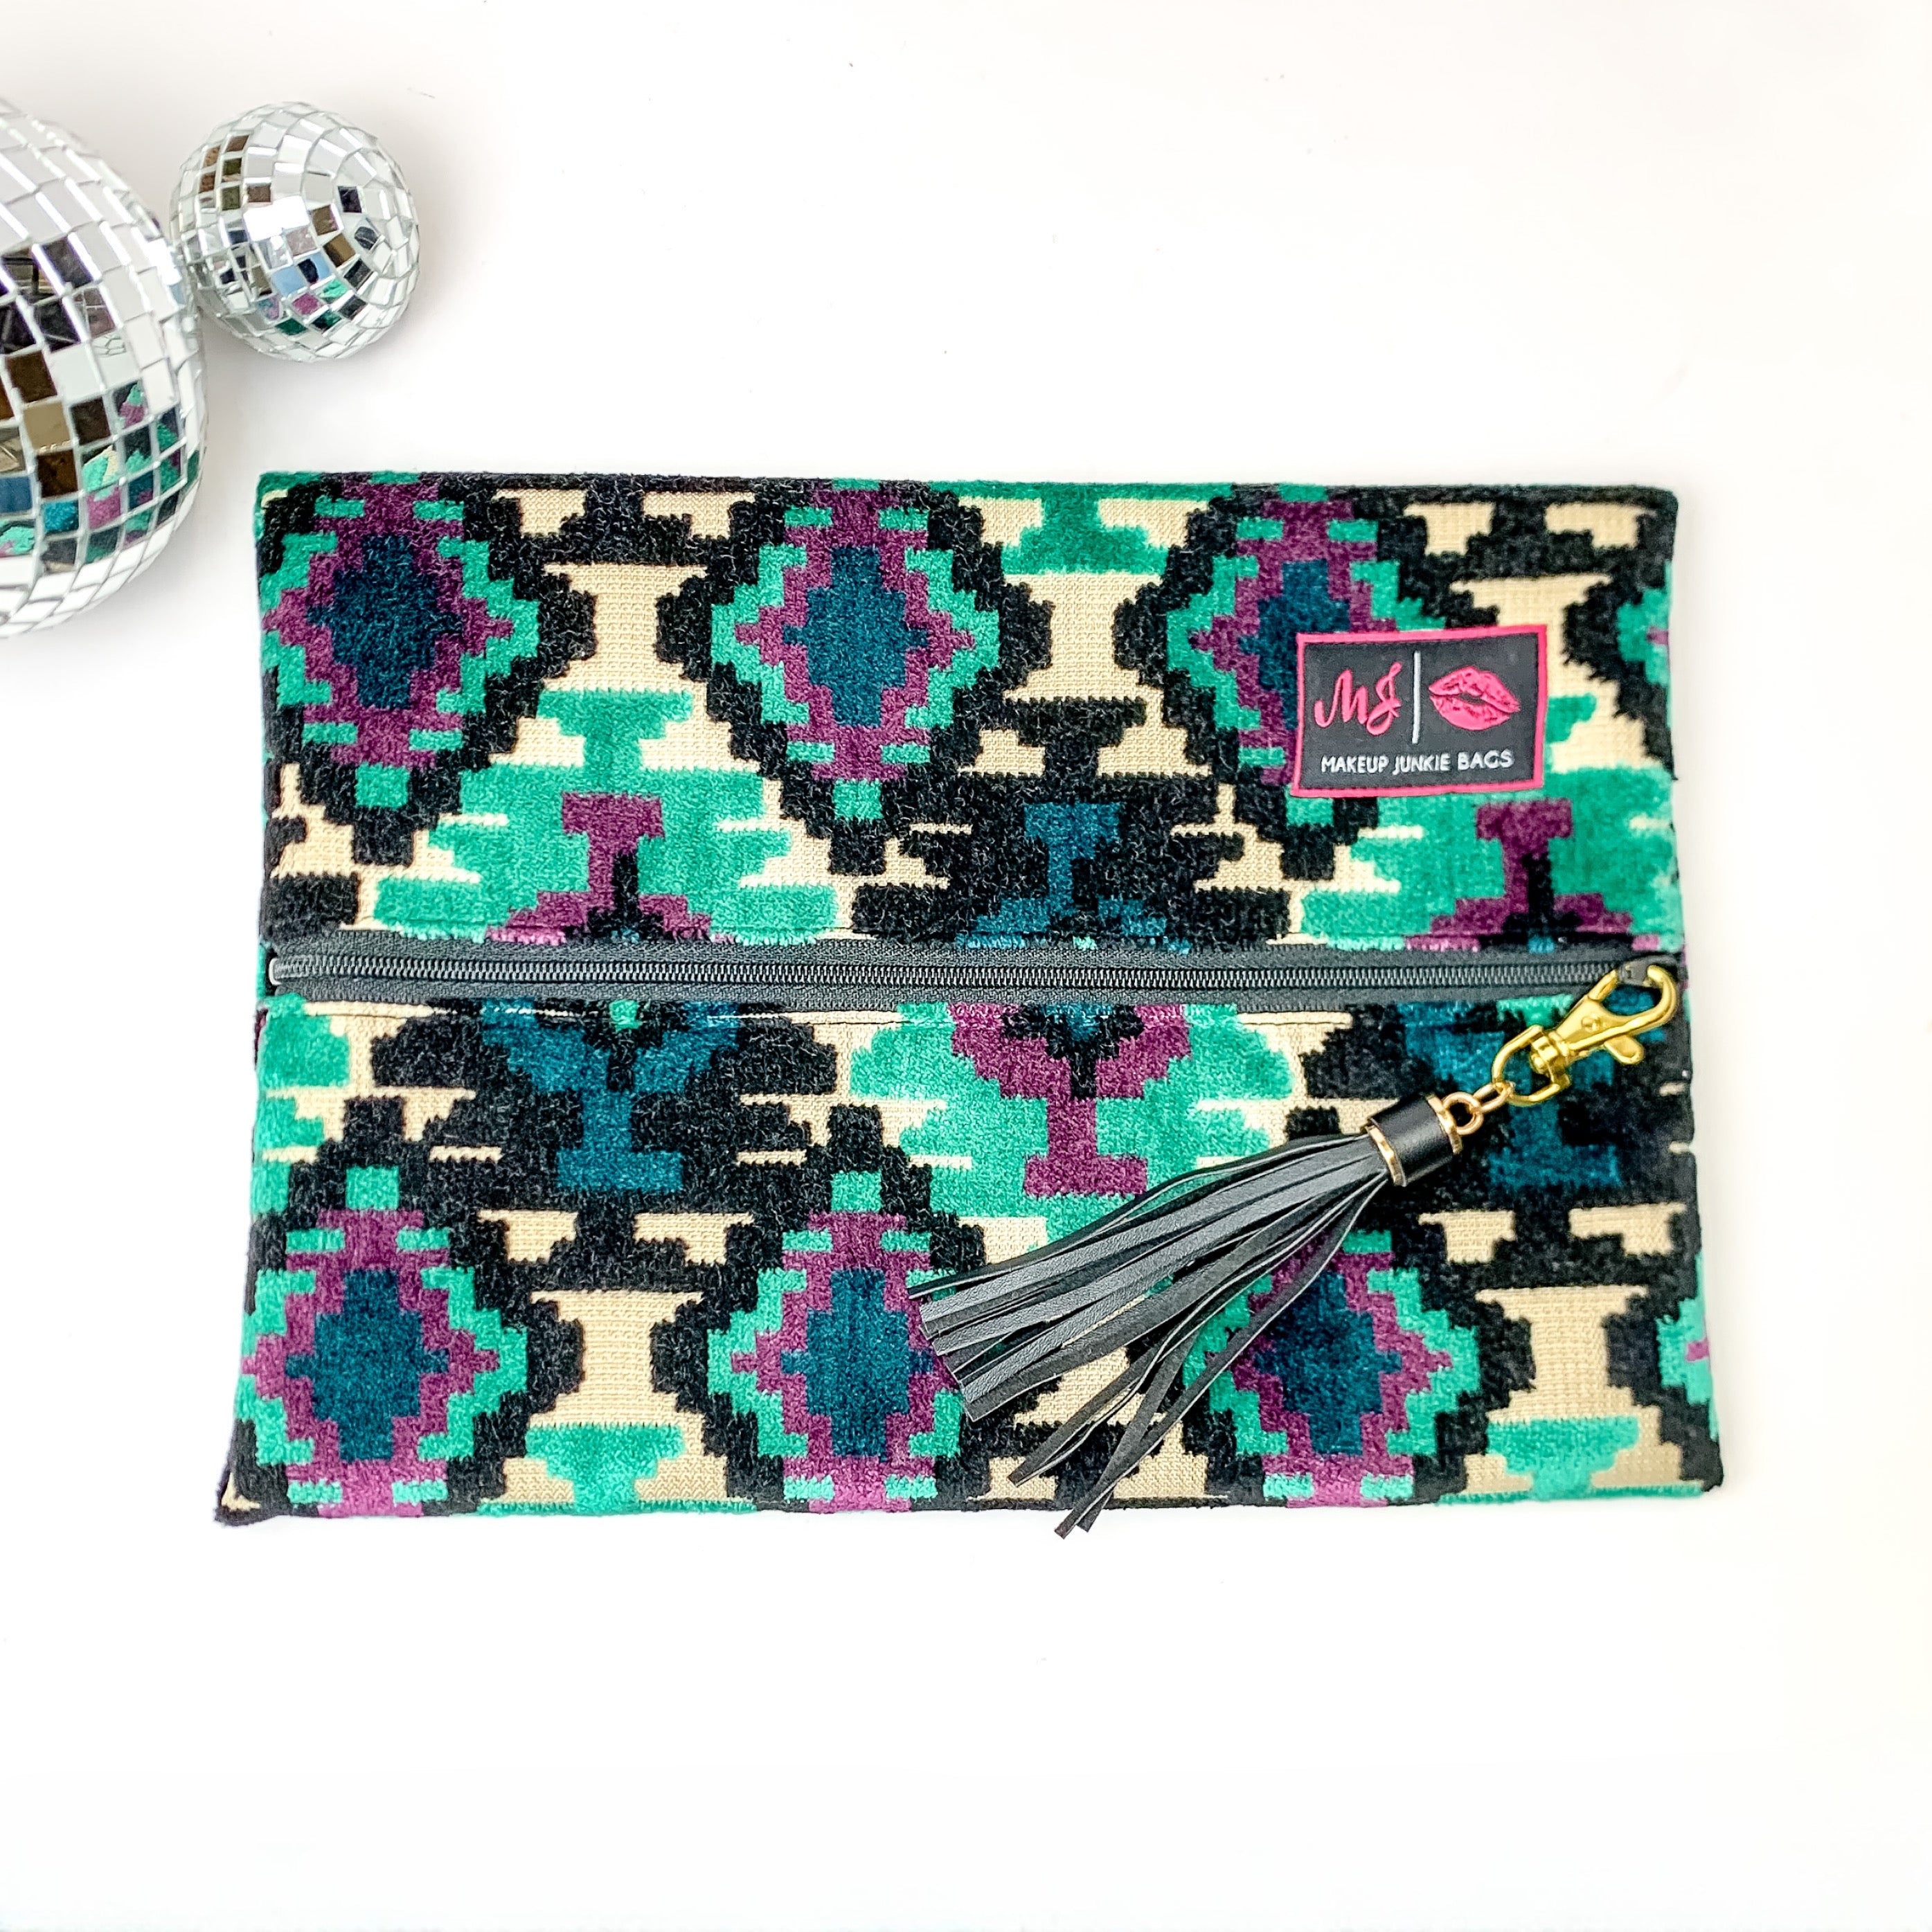 Pictured on a white background with disco balls at top is a lay flat bag in a midnight aztec print. This bag includes a middle zipper and a tassel.